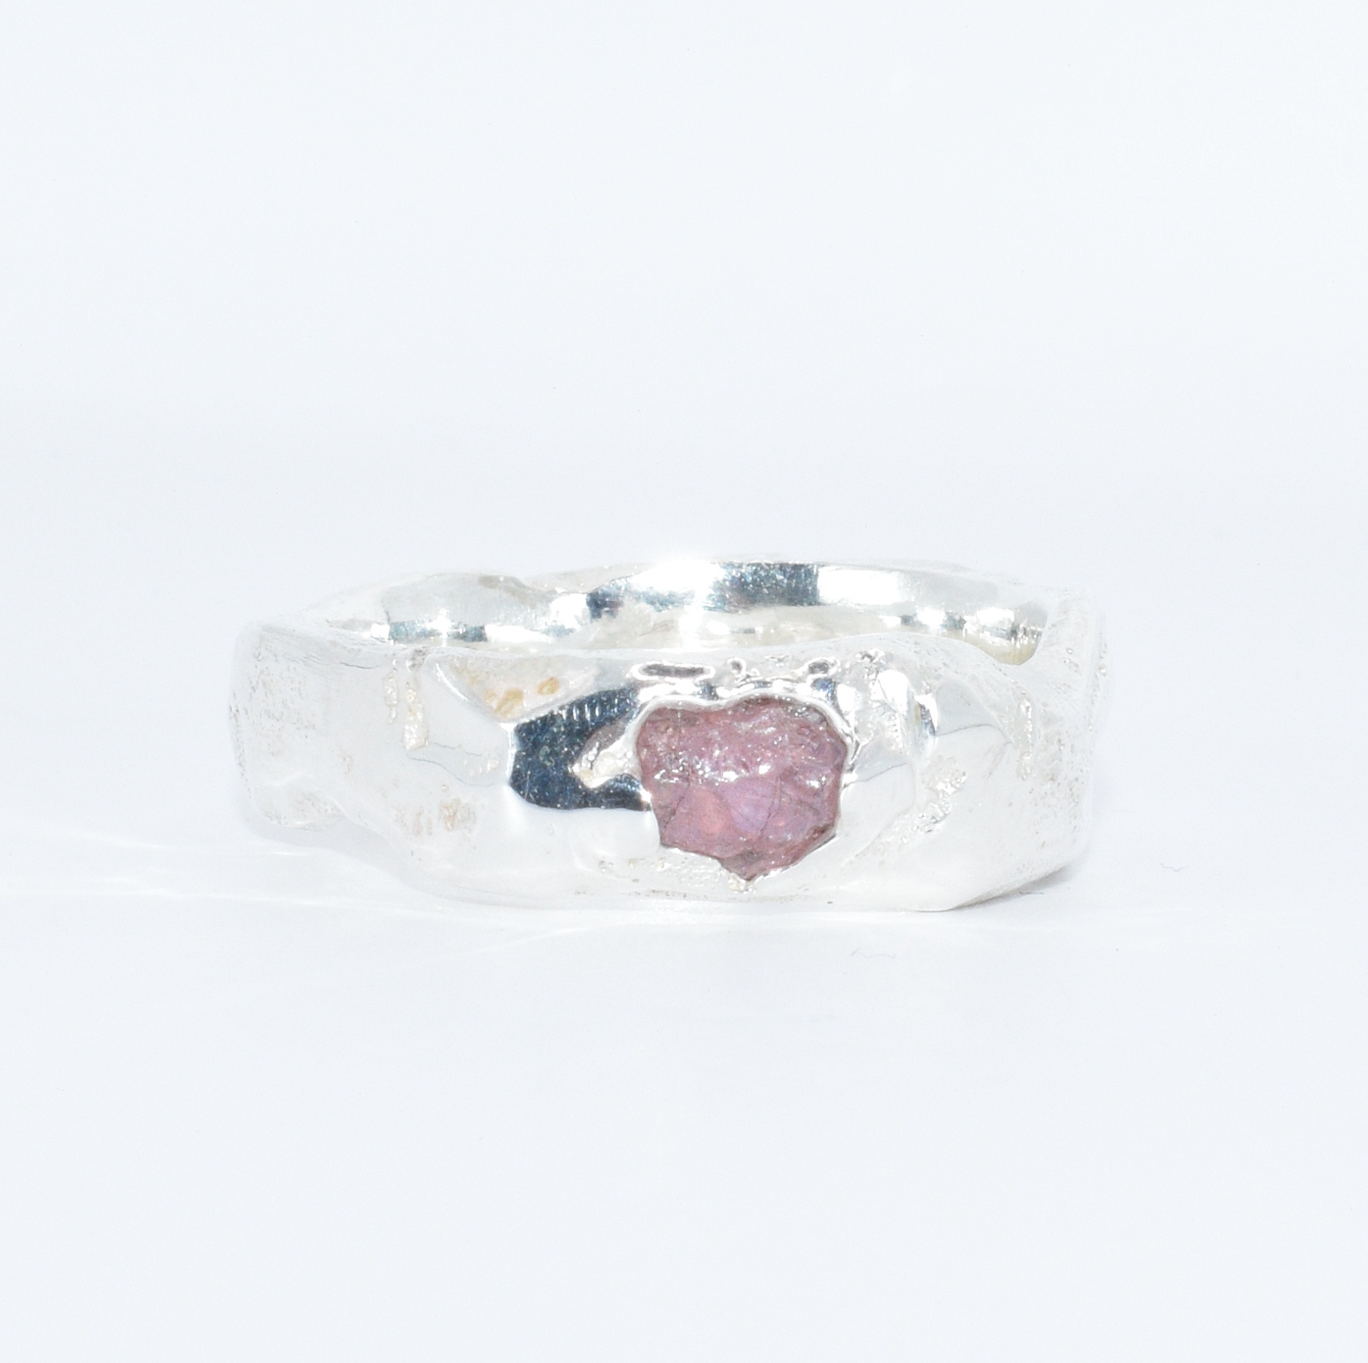 silver ring with uncut pink sapphire set into the front, close up shot